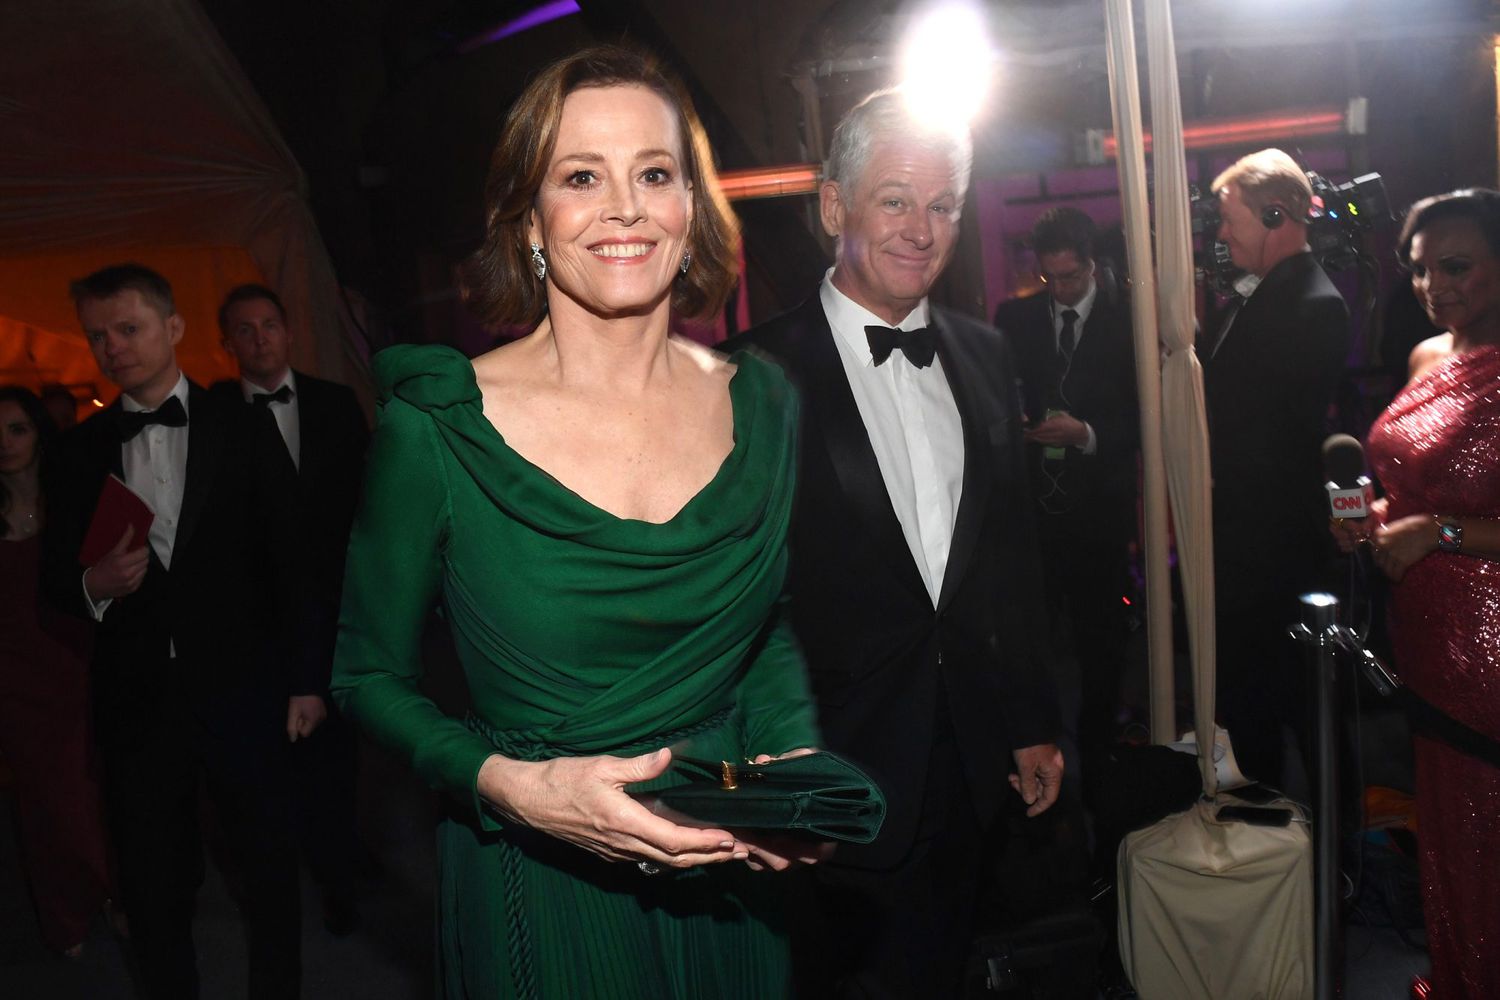 <p>Sigourney Weaver and Jim Simpson had date night at the Governor's Ball after the Academy Awards.</p>
                            